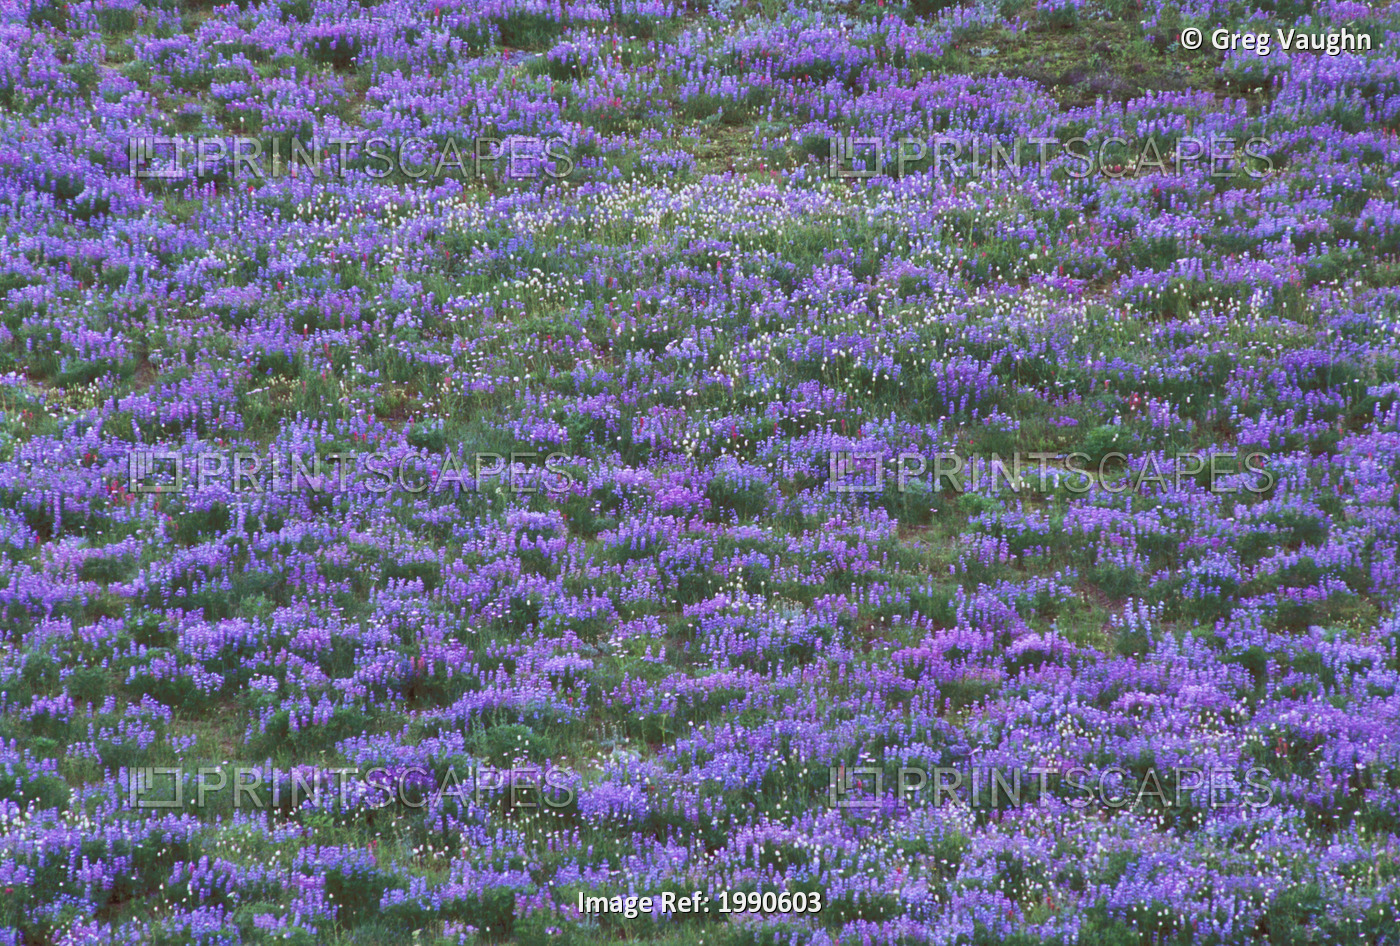 Washington, View Of Large Field Of Purple Lupines And Wildflowers Growing